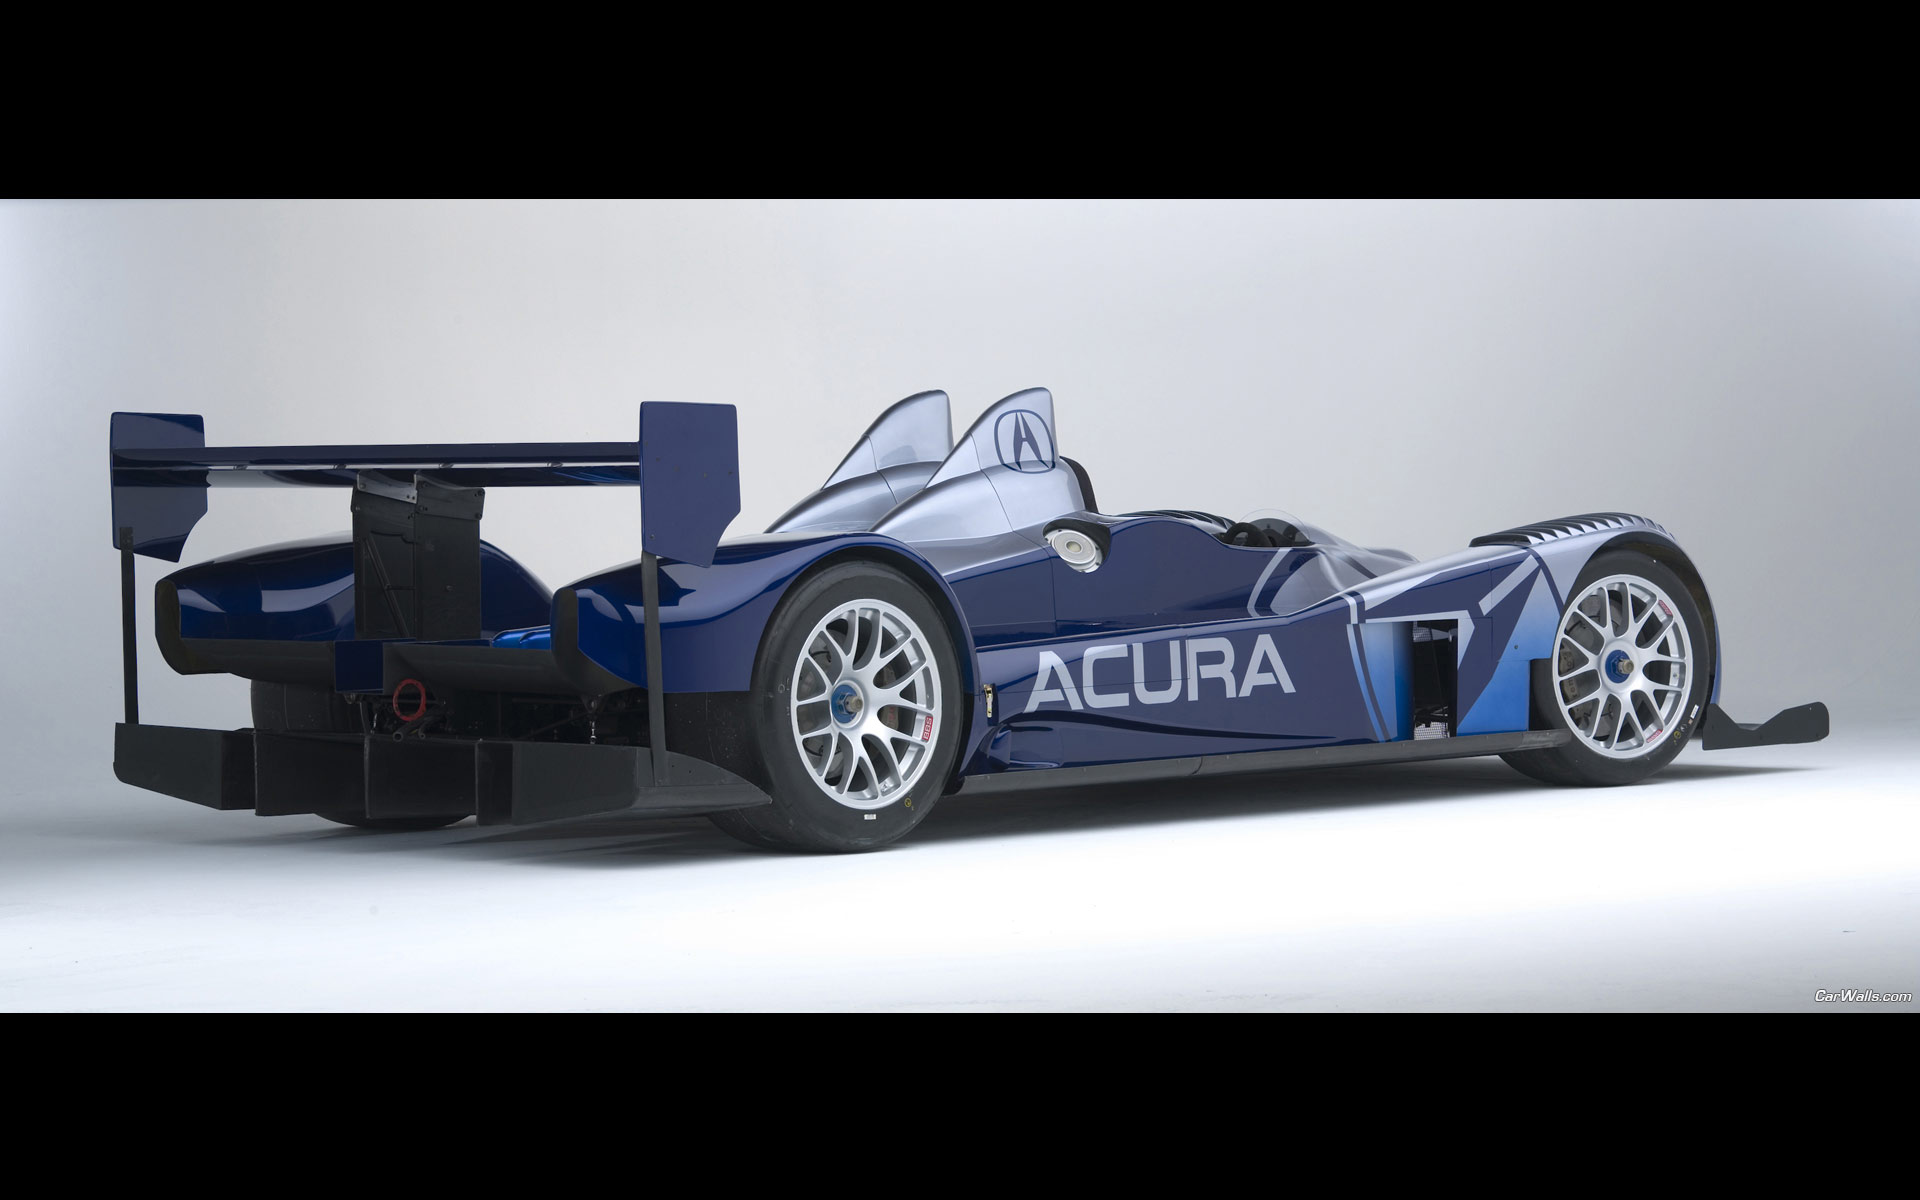 Download High quality Acura ALMS side Acura wallpaper / 1920x1200